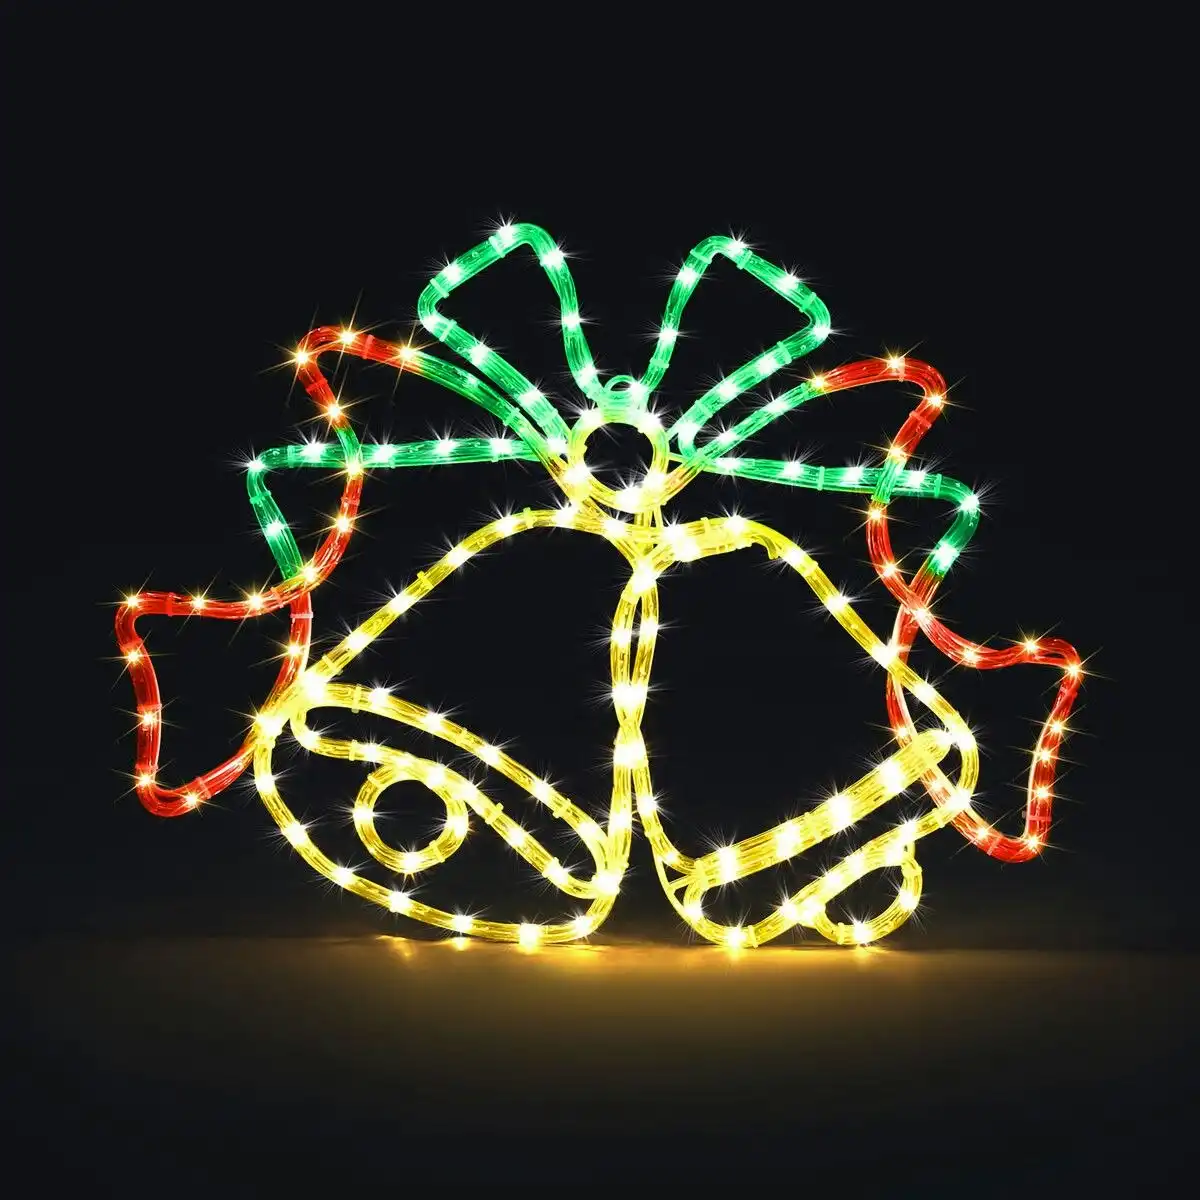 Solight Christmas LED Light Strip Rope Xmas Bell Decor Holiday Ornament Outdoor Indoor 60 x 40CM